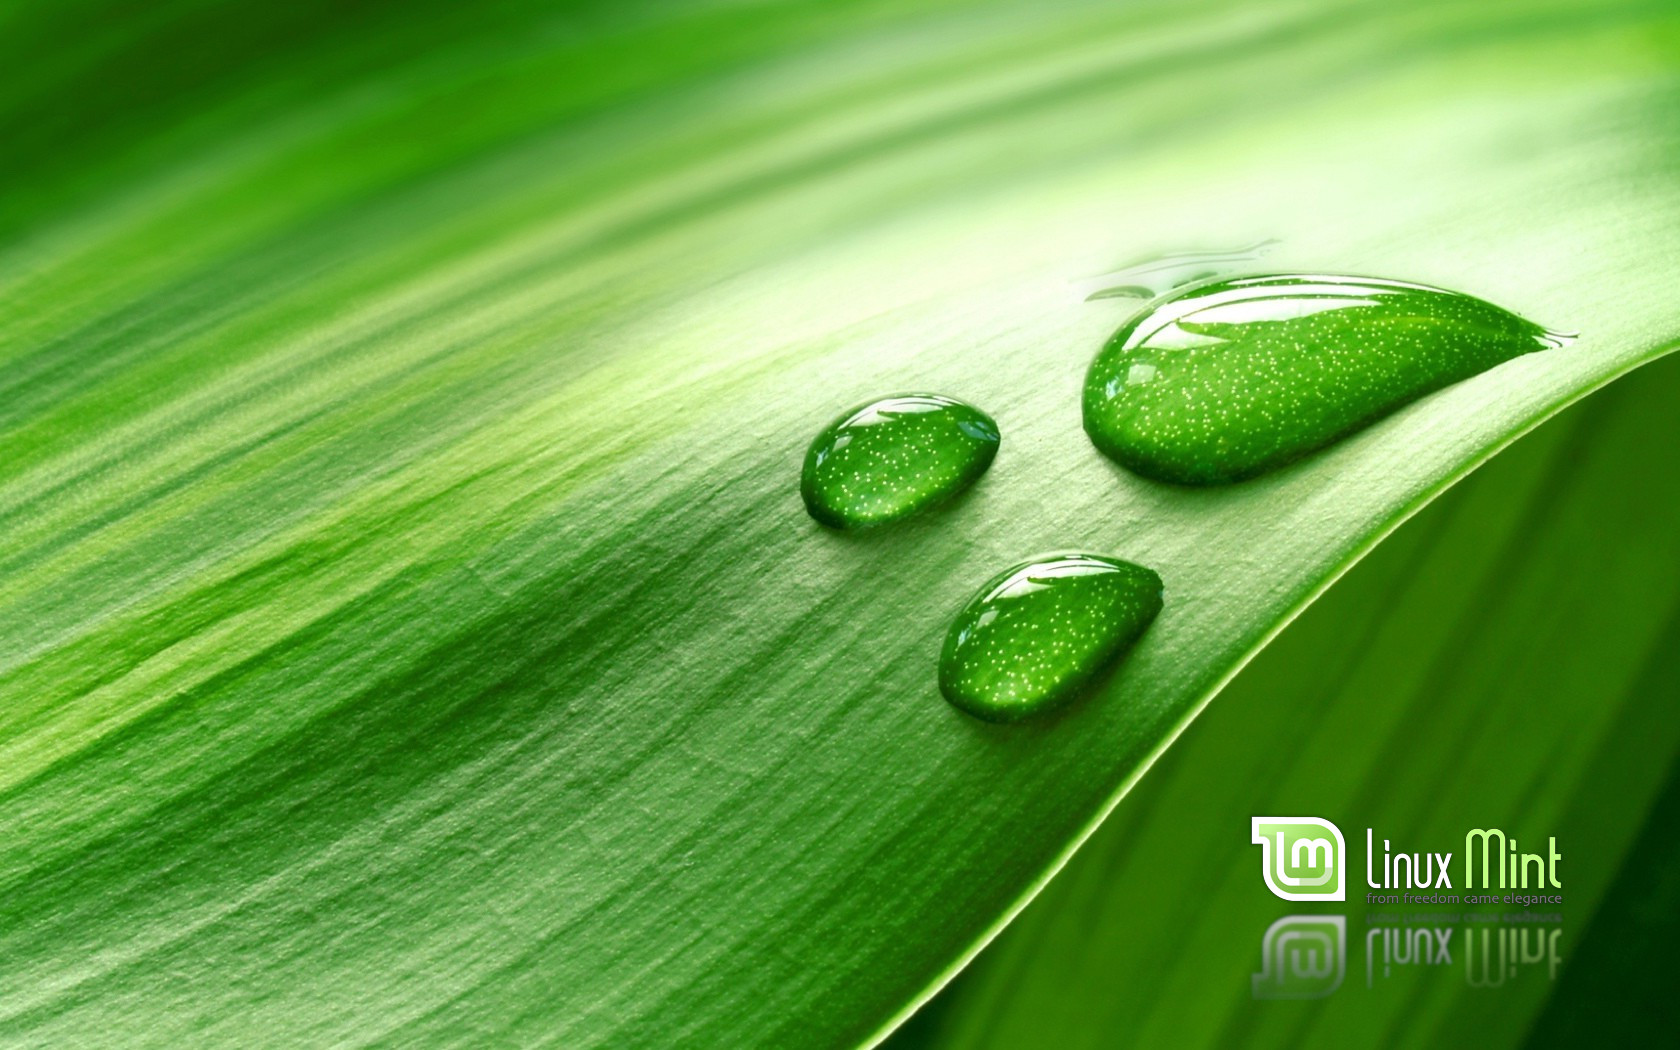 General 1680x1050 Linux Linux Mint typography water drops nature plants leaves